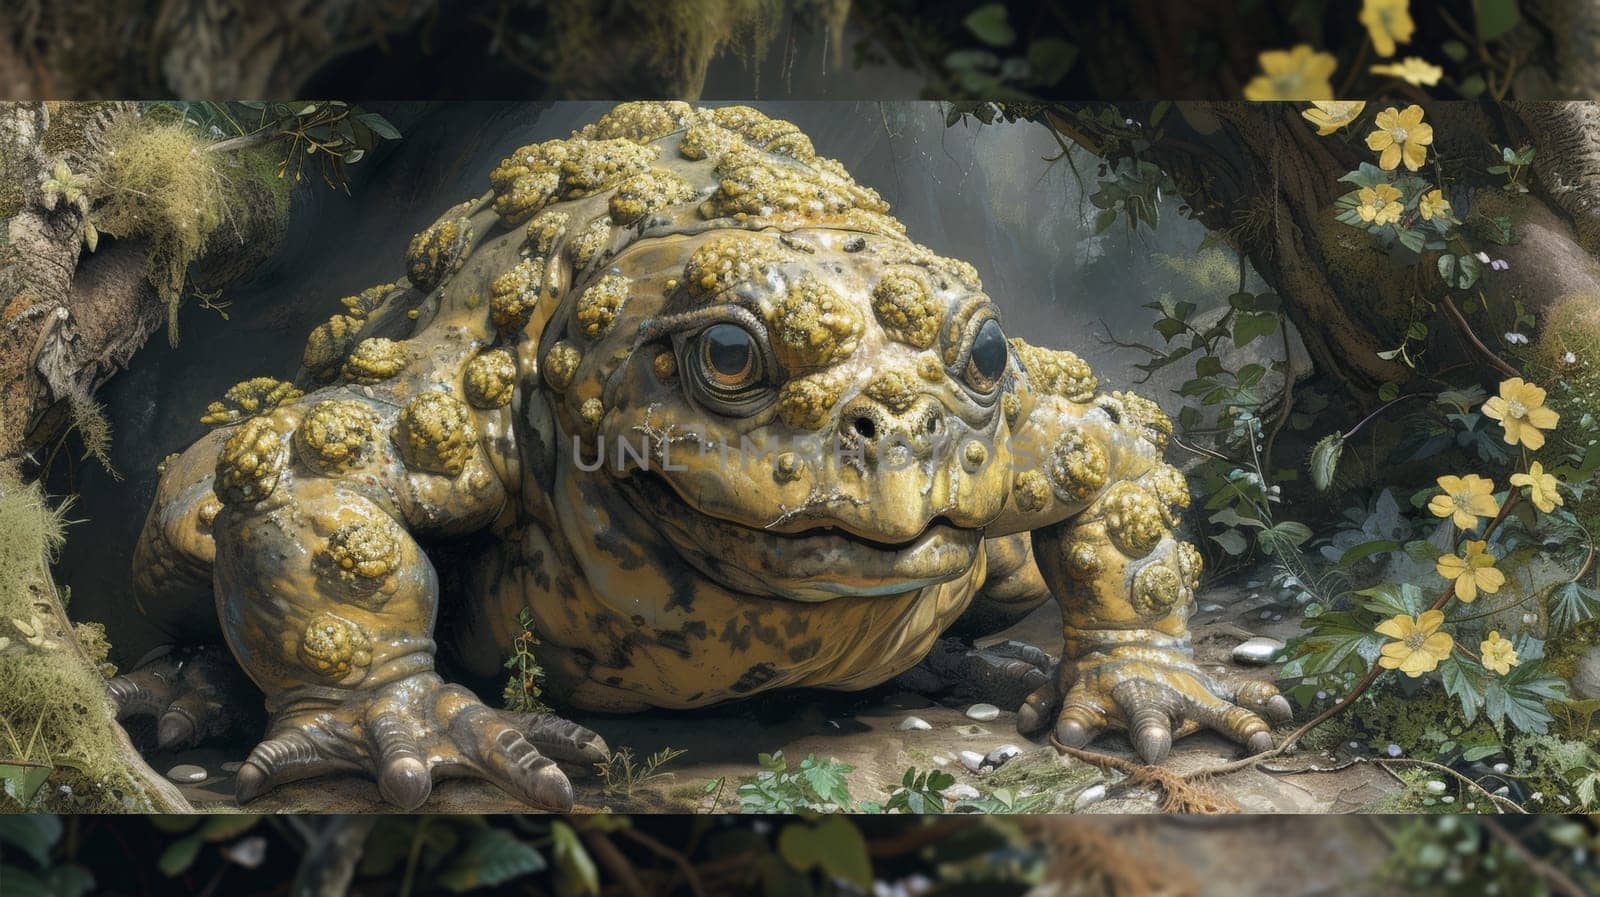 A large toad sitting in a forest with flowers and leaves